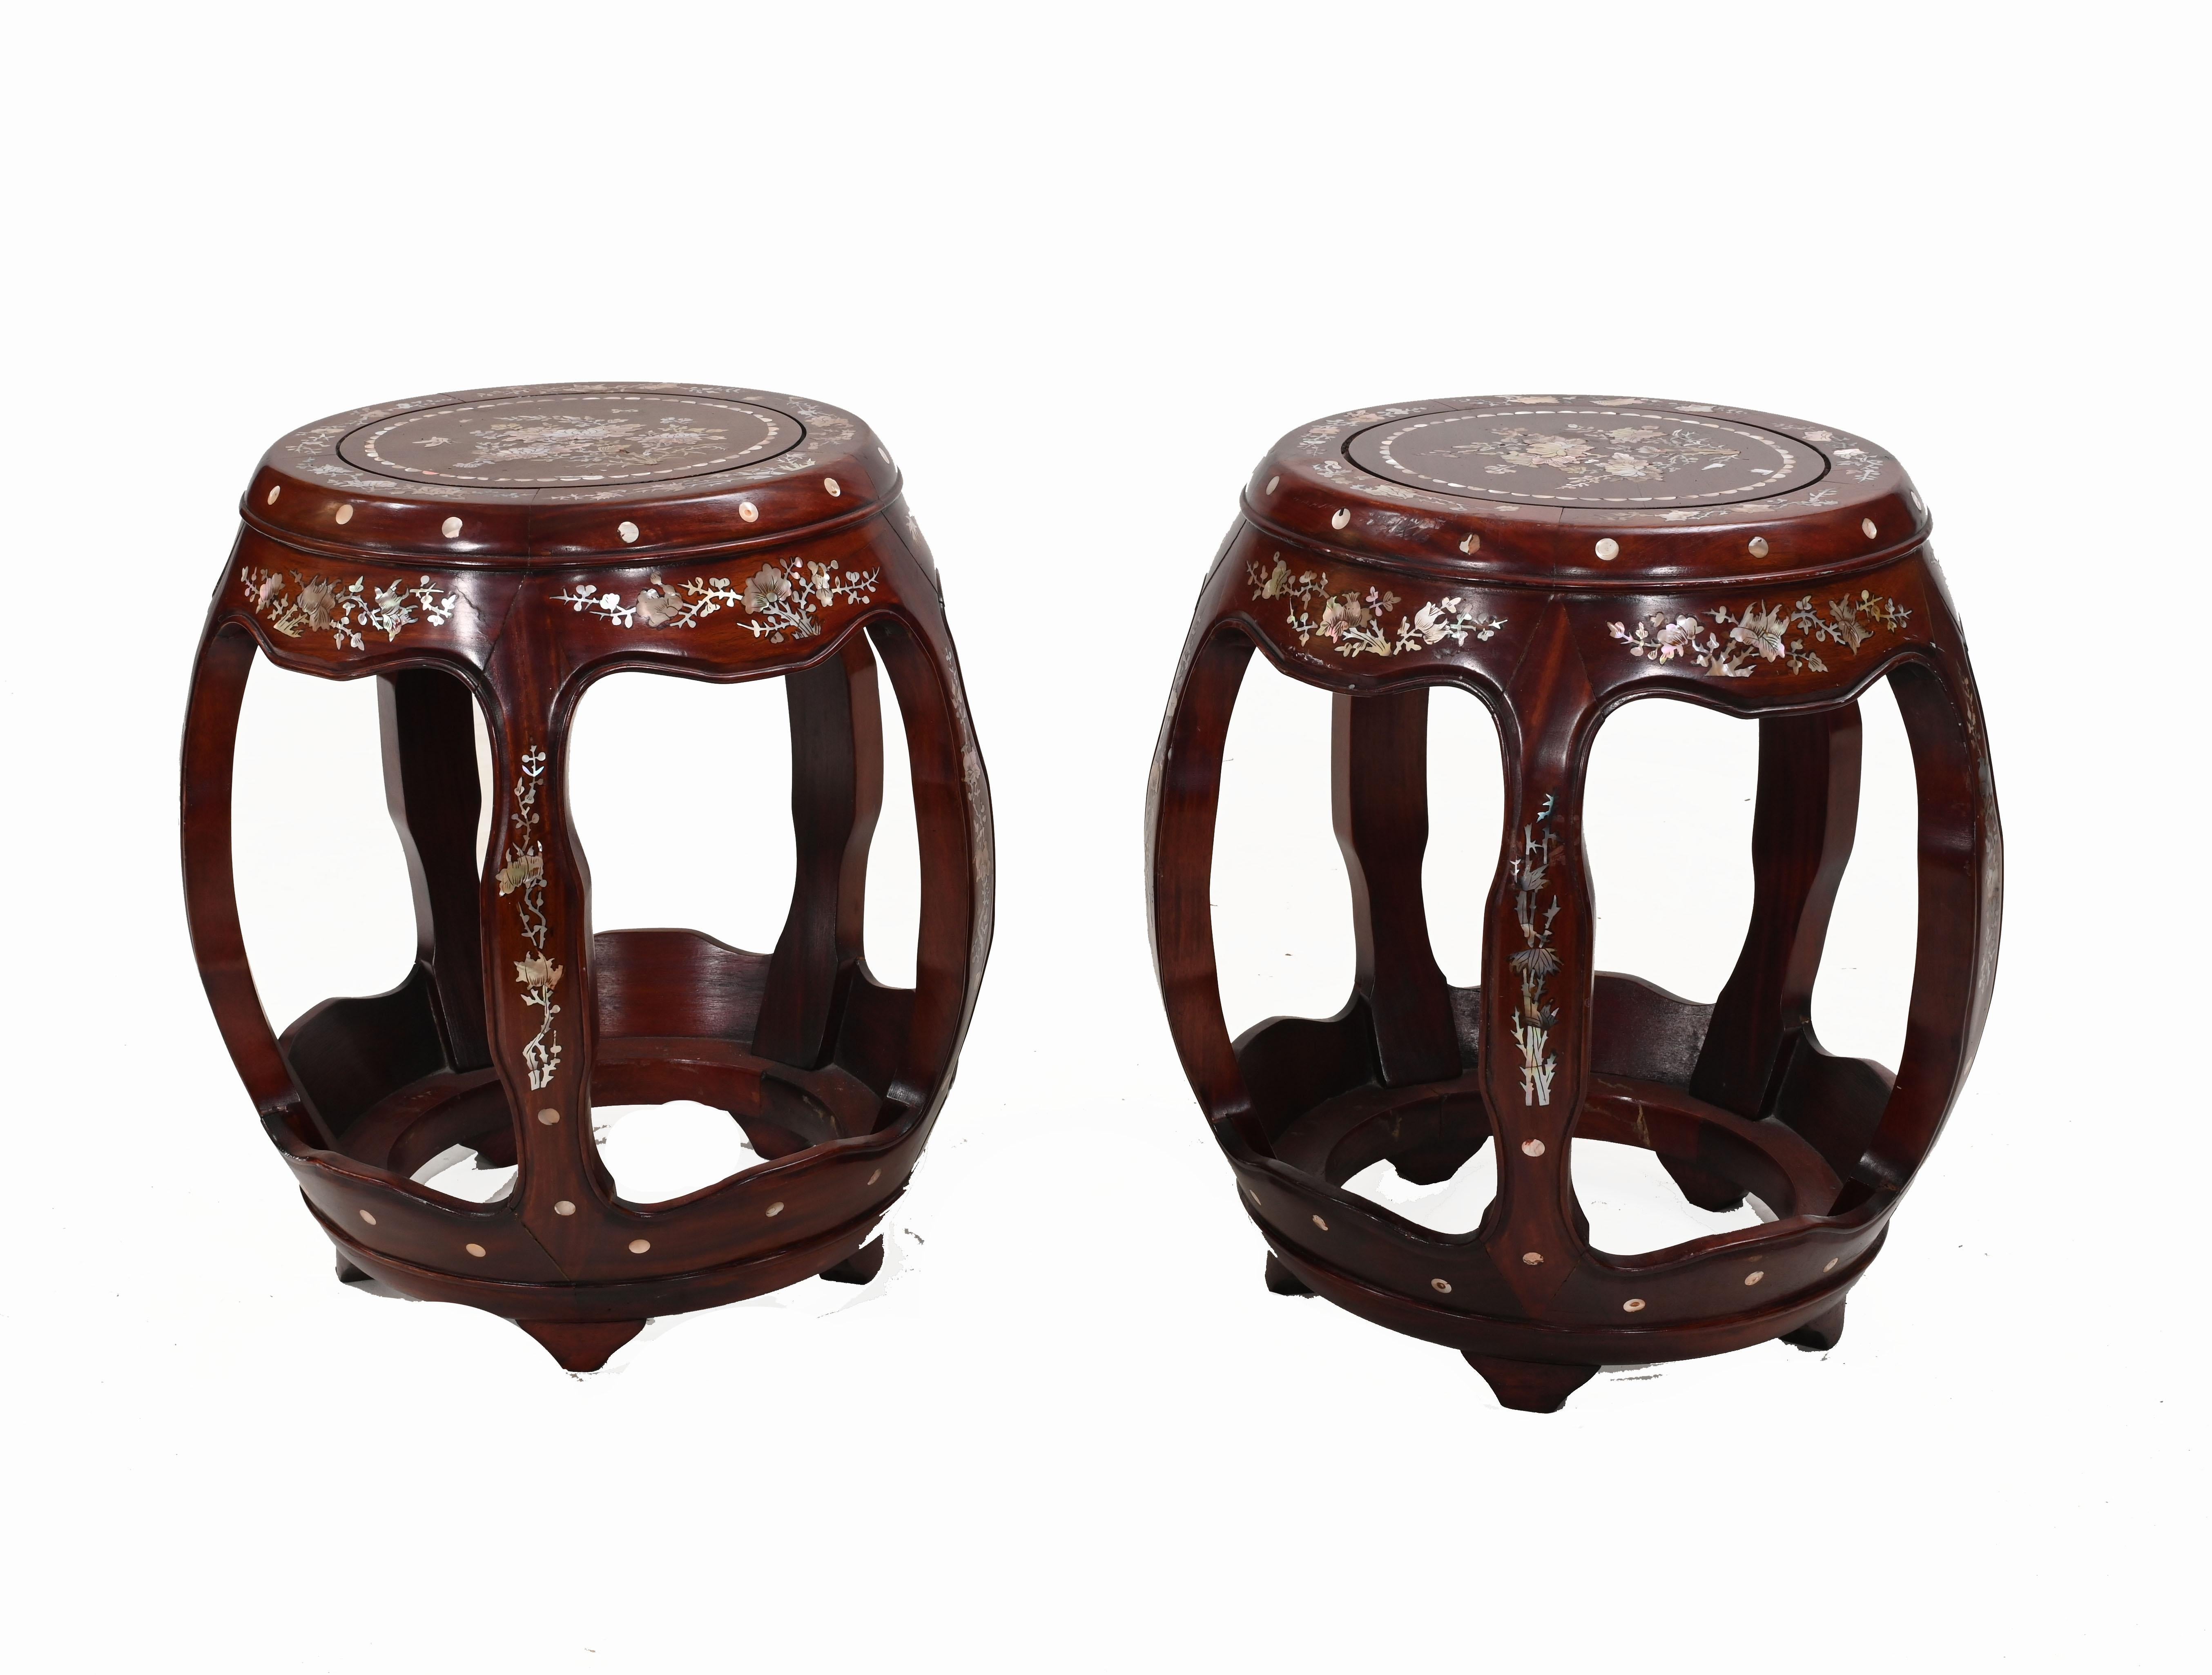 Pair Chinese Barrel Seats Pedestal Stand Tables 2